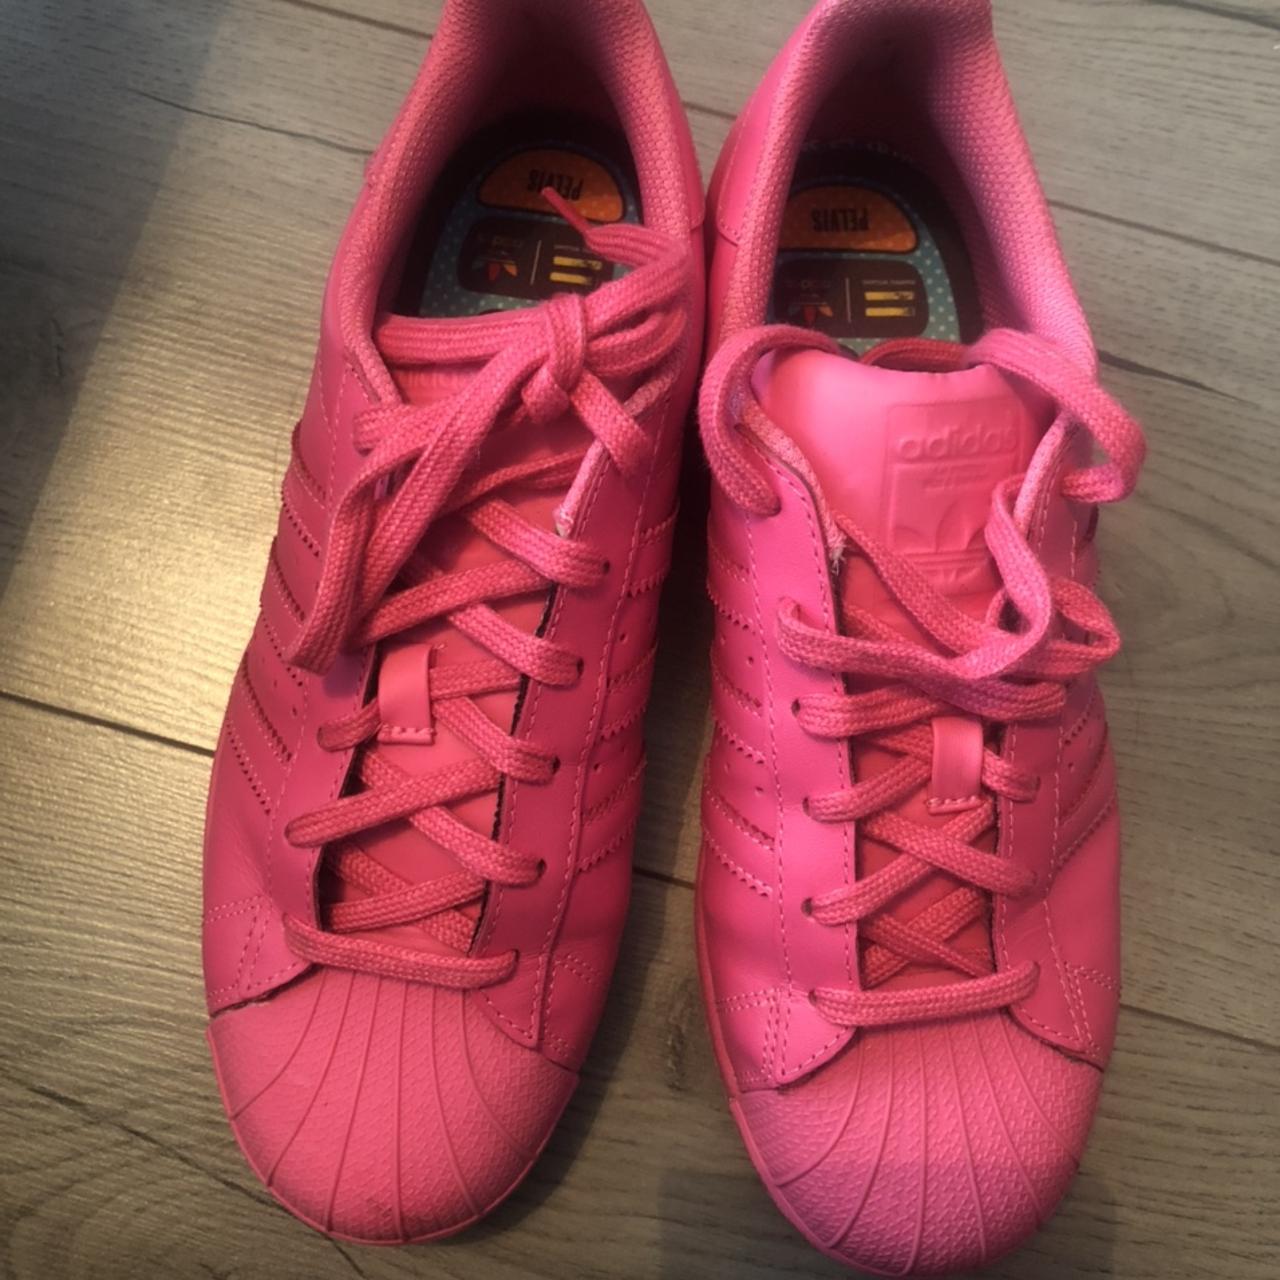 Pink Adidas Shell Toes Size556 Been Worn Once Depop 9373